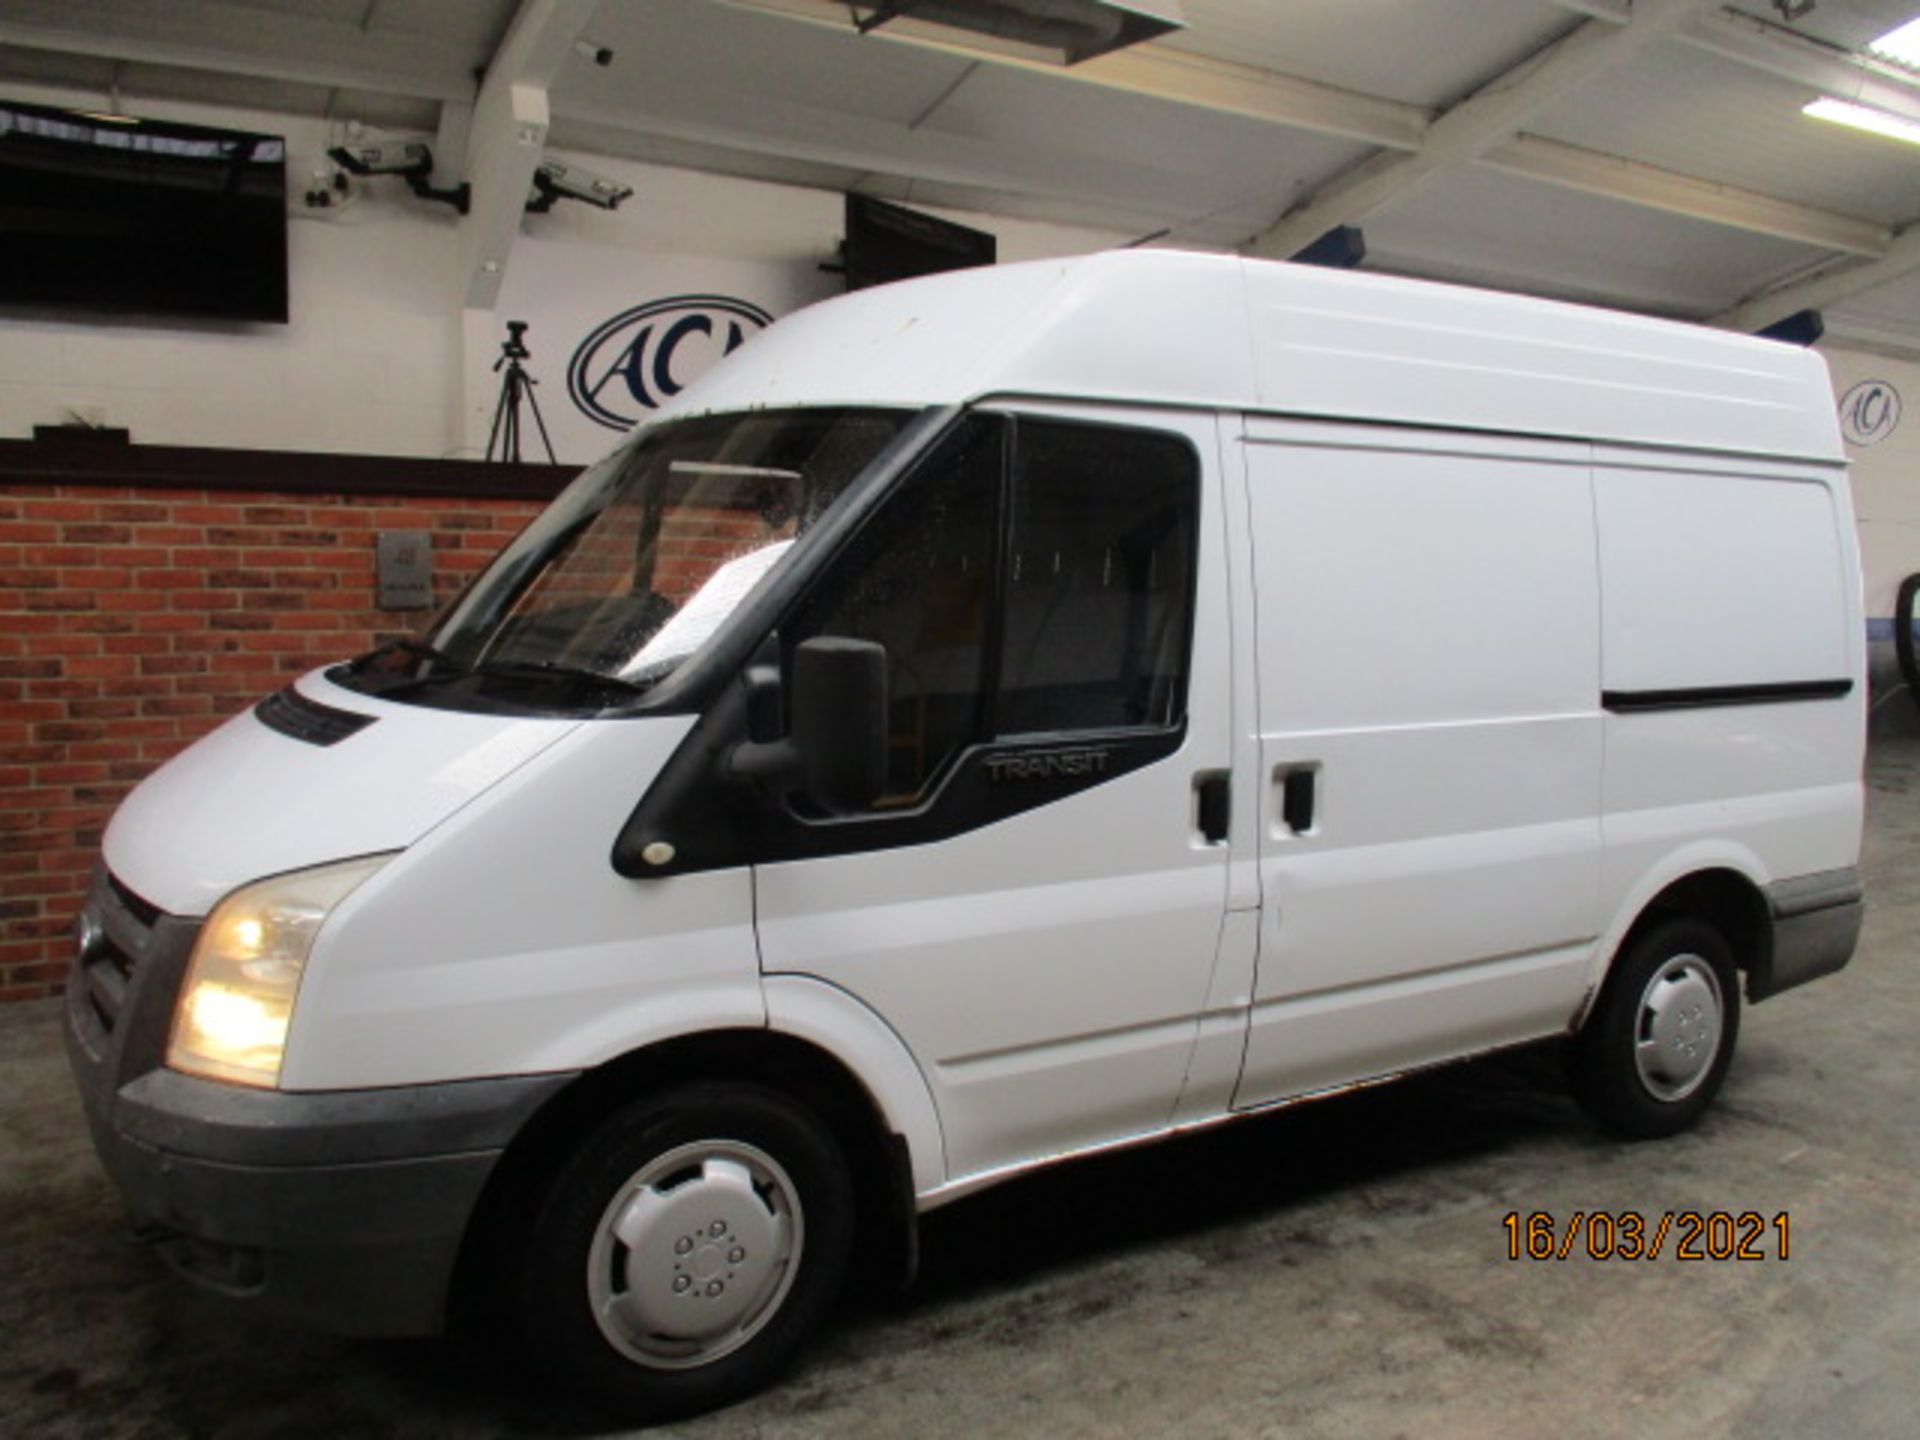 08 08 Ford Transit T260 TWD - Image 36 of 36